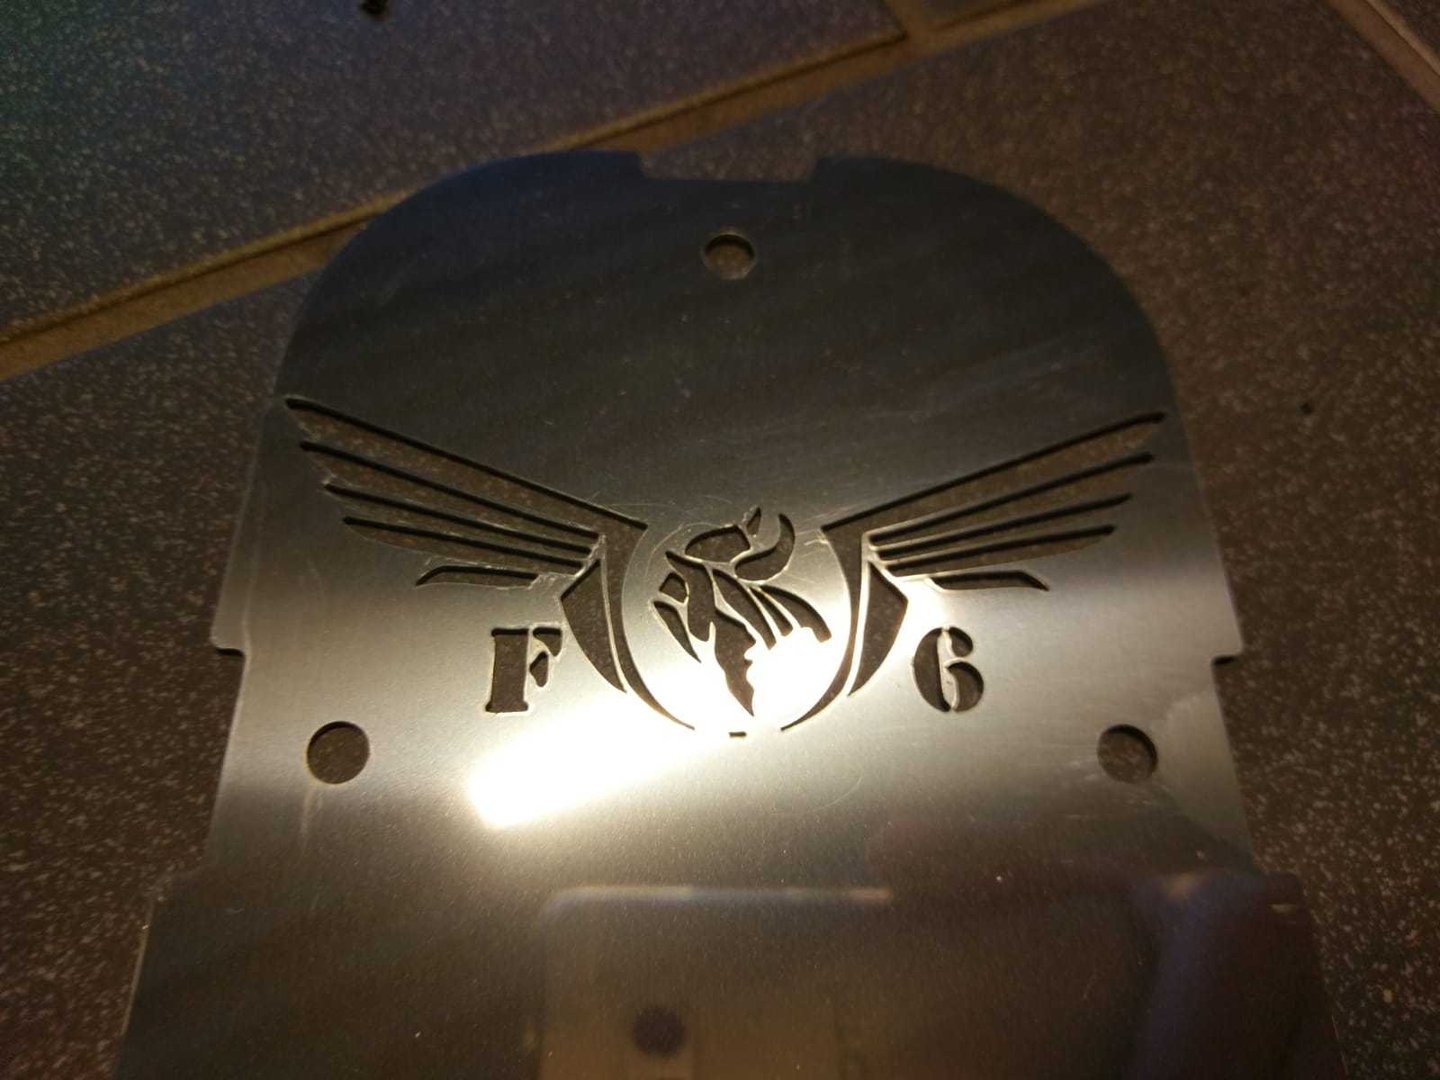 Backrest Plate "F6 with logo"